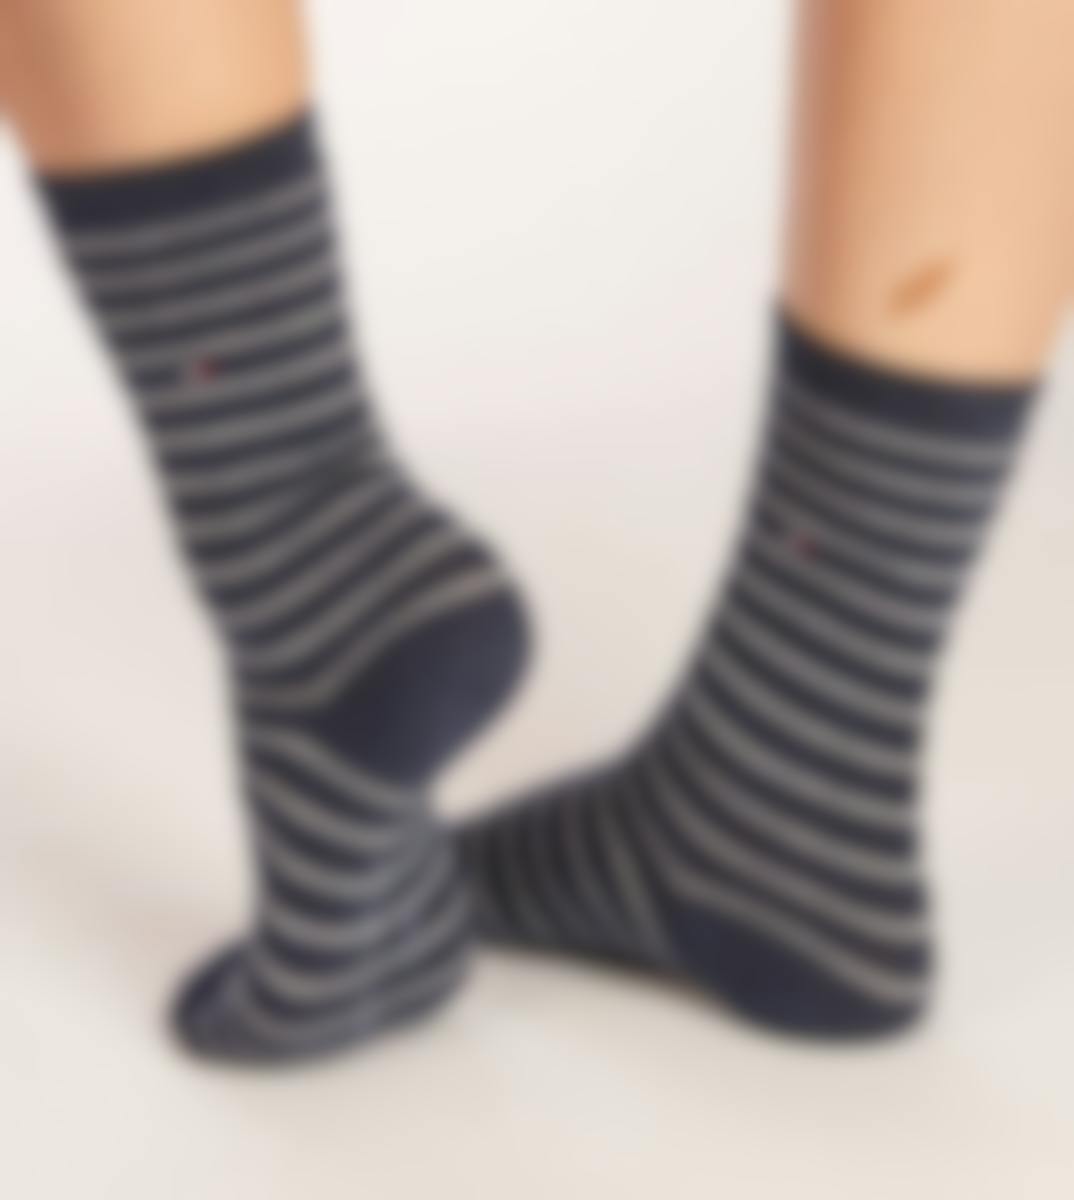 Tommy Hilfiger chaussettes 4 paires Small Stripe Femmes